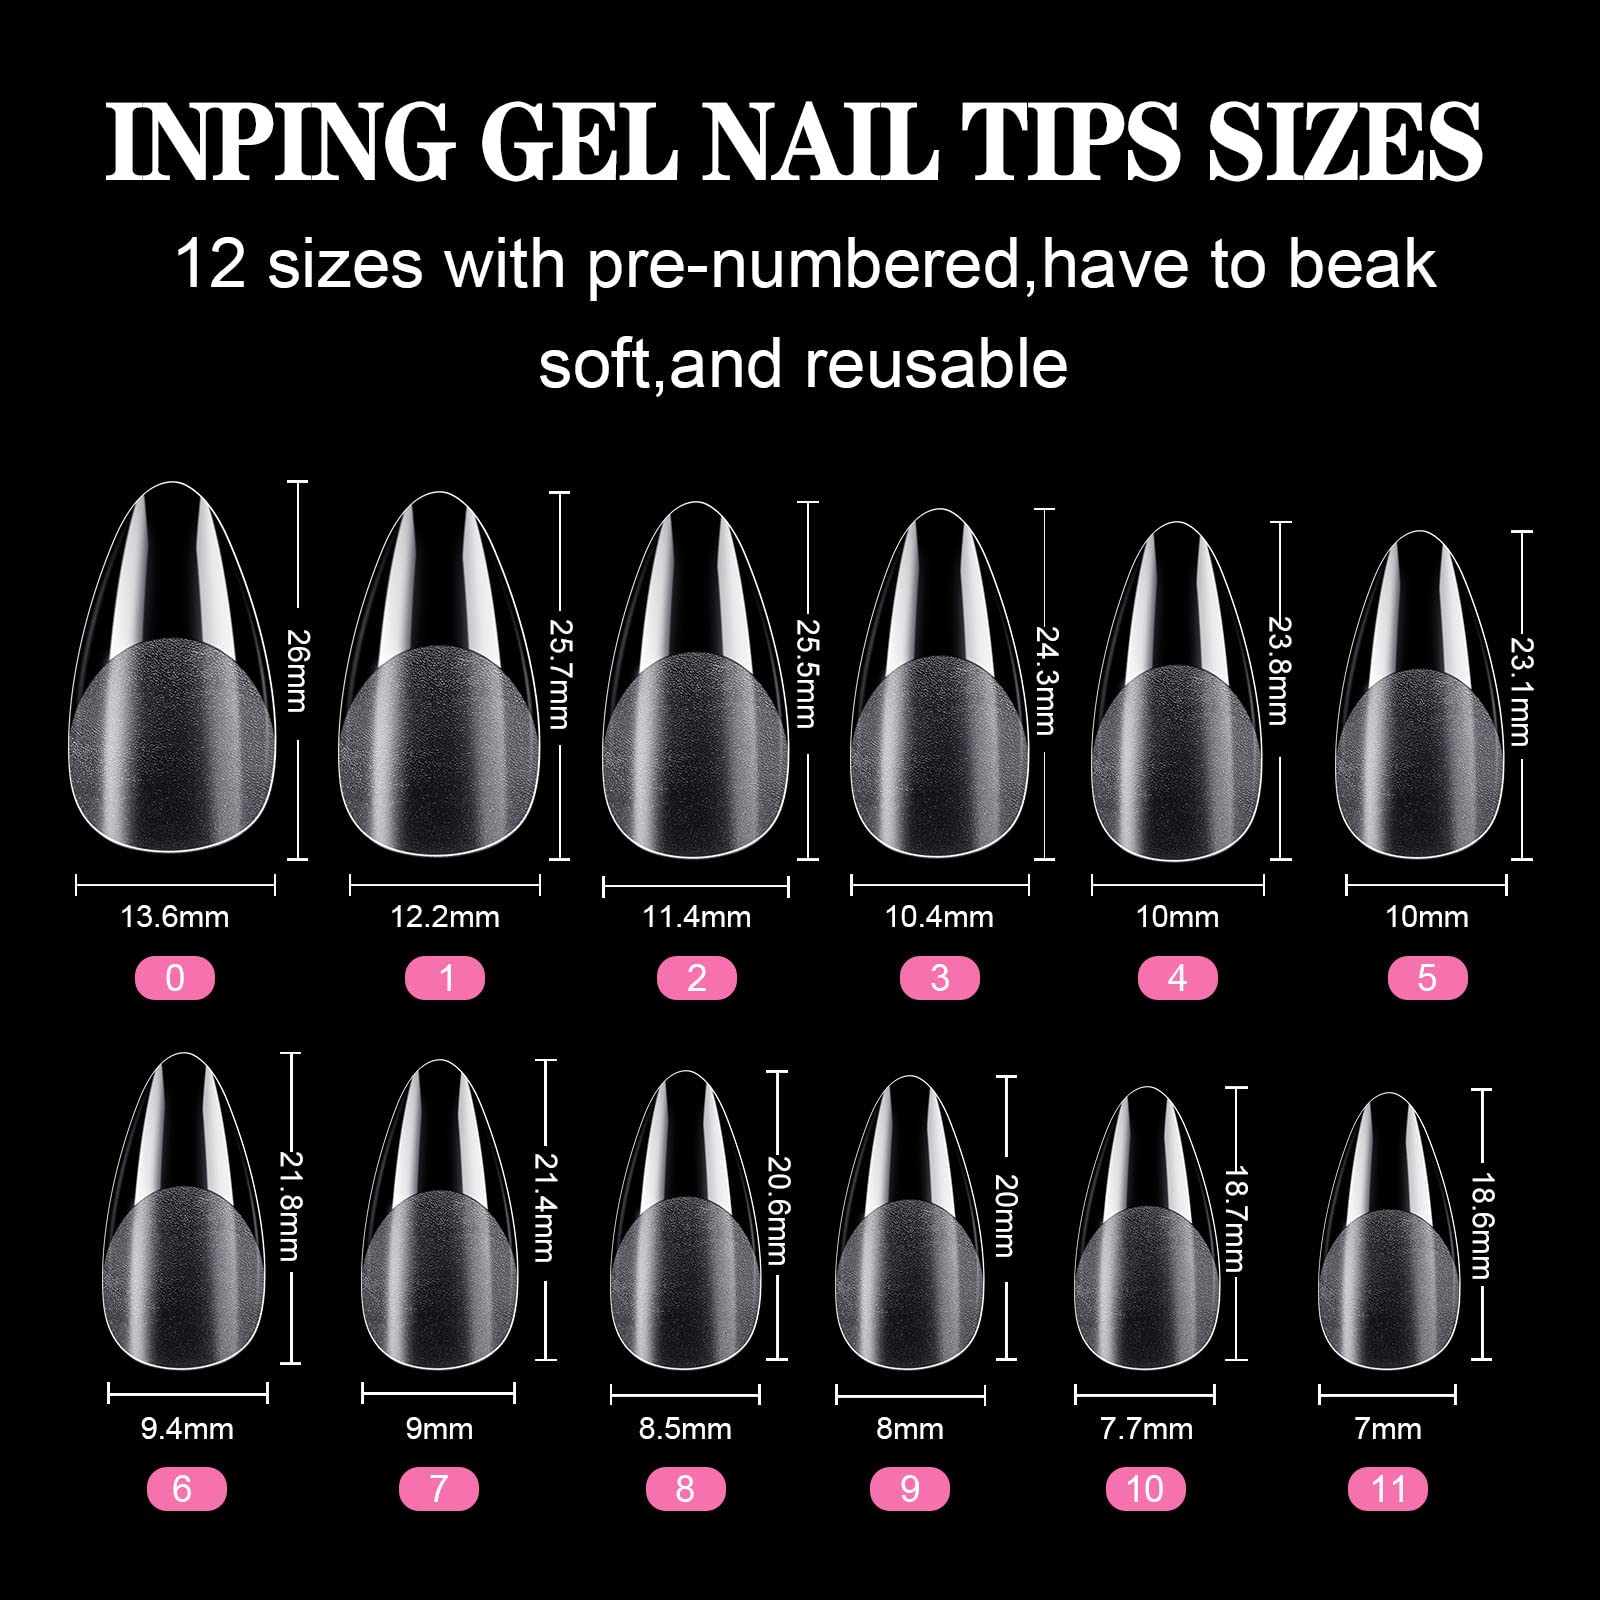 INPING Soft Gel Full Cover Nail Tips, 120PCS Medium Almond Nail Extensions Clear Pre-Shaped No Trace Acrylic Fase Artificial Nails Tips for Starter Home DIY Nail Art Nail Salons, 12 SIZES